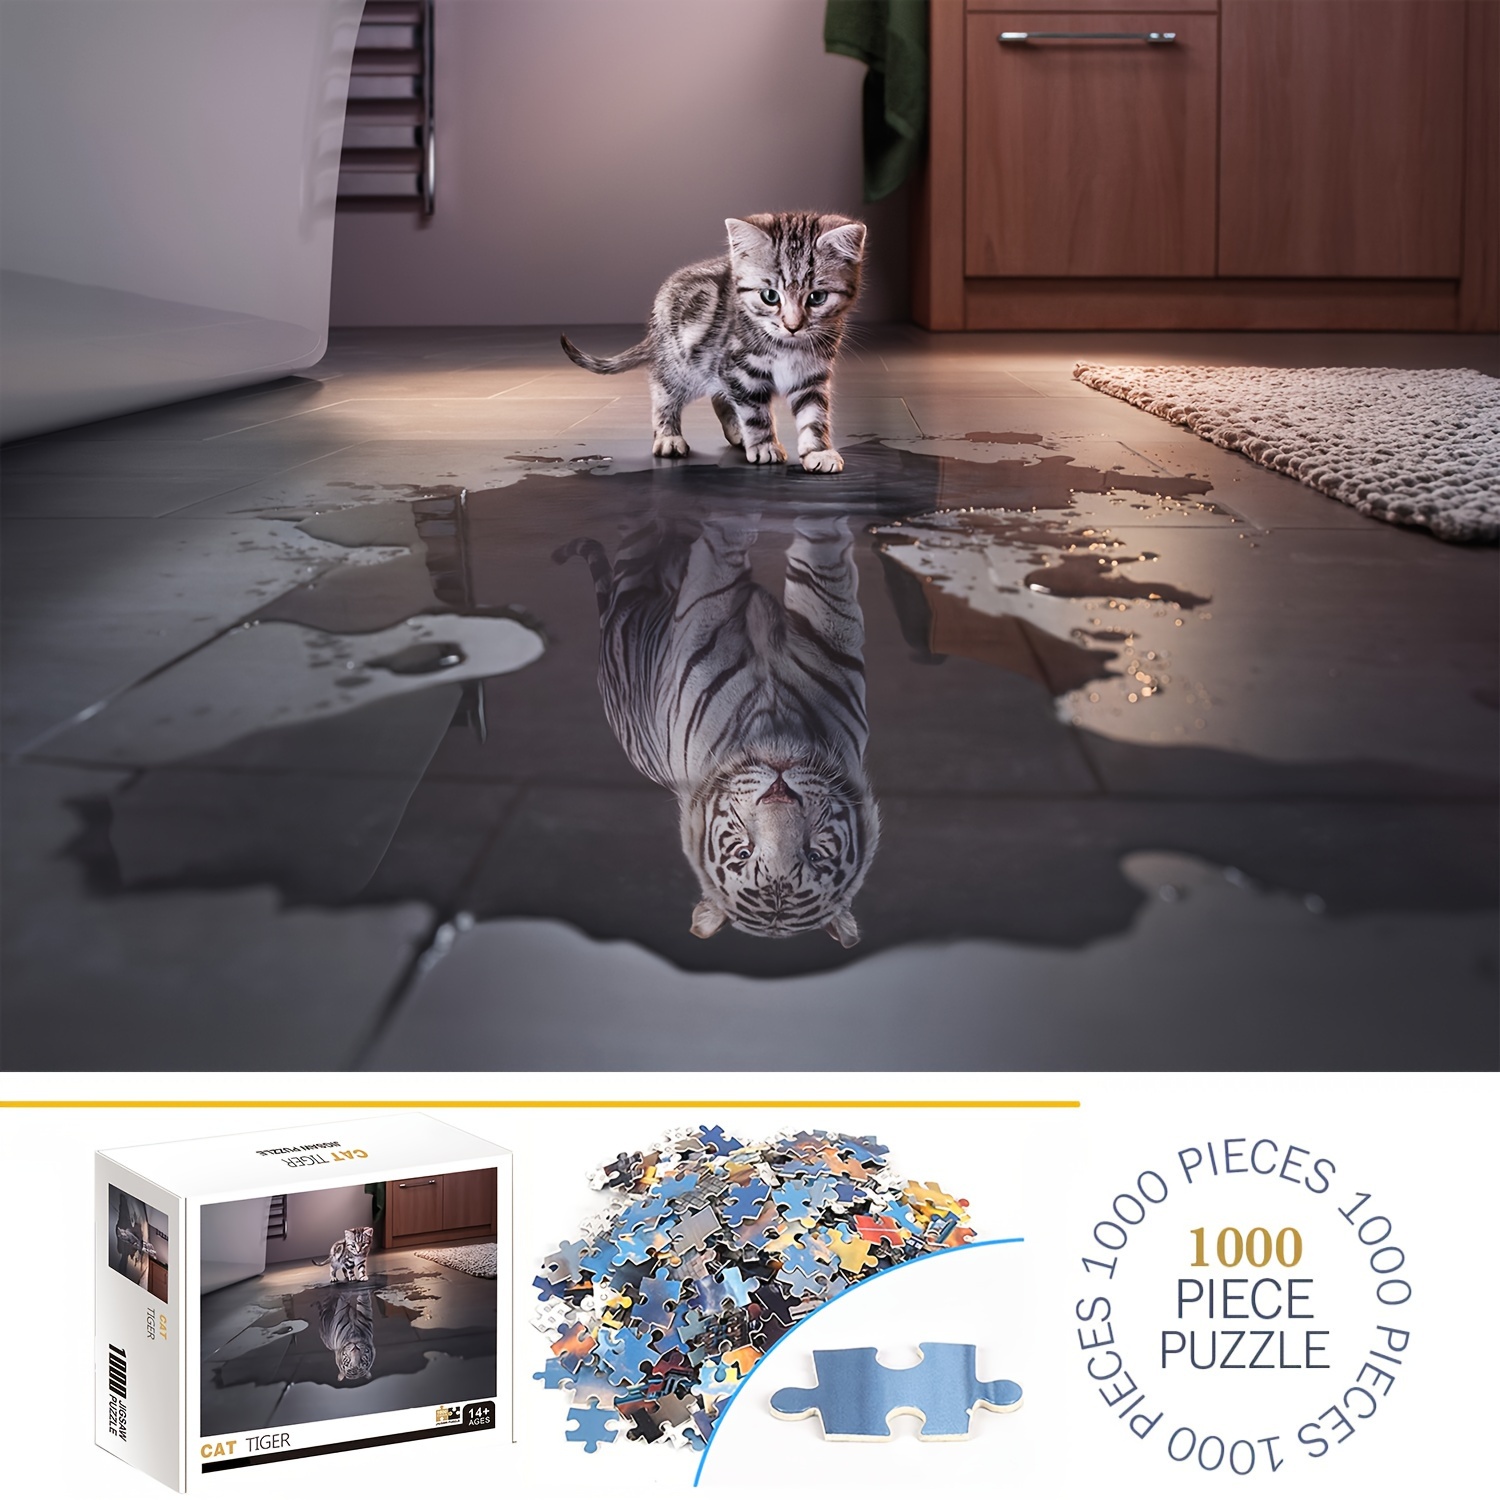 

1000pcs Cat Tiger Puzzles, Thick And Durable Seamless Jigsaw Puzzles For Adults Fun Family Challenging Puzzles For Birthday, Christmas, Halloween, Thanksgiving, Easter